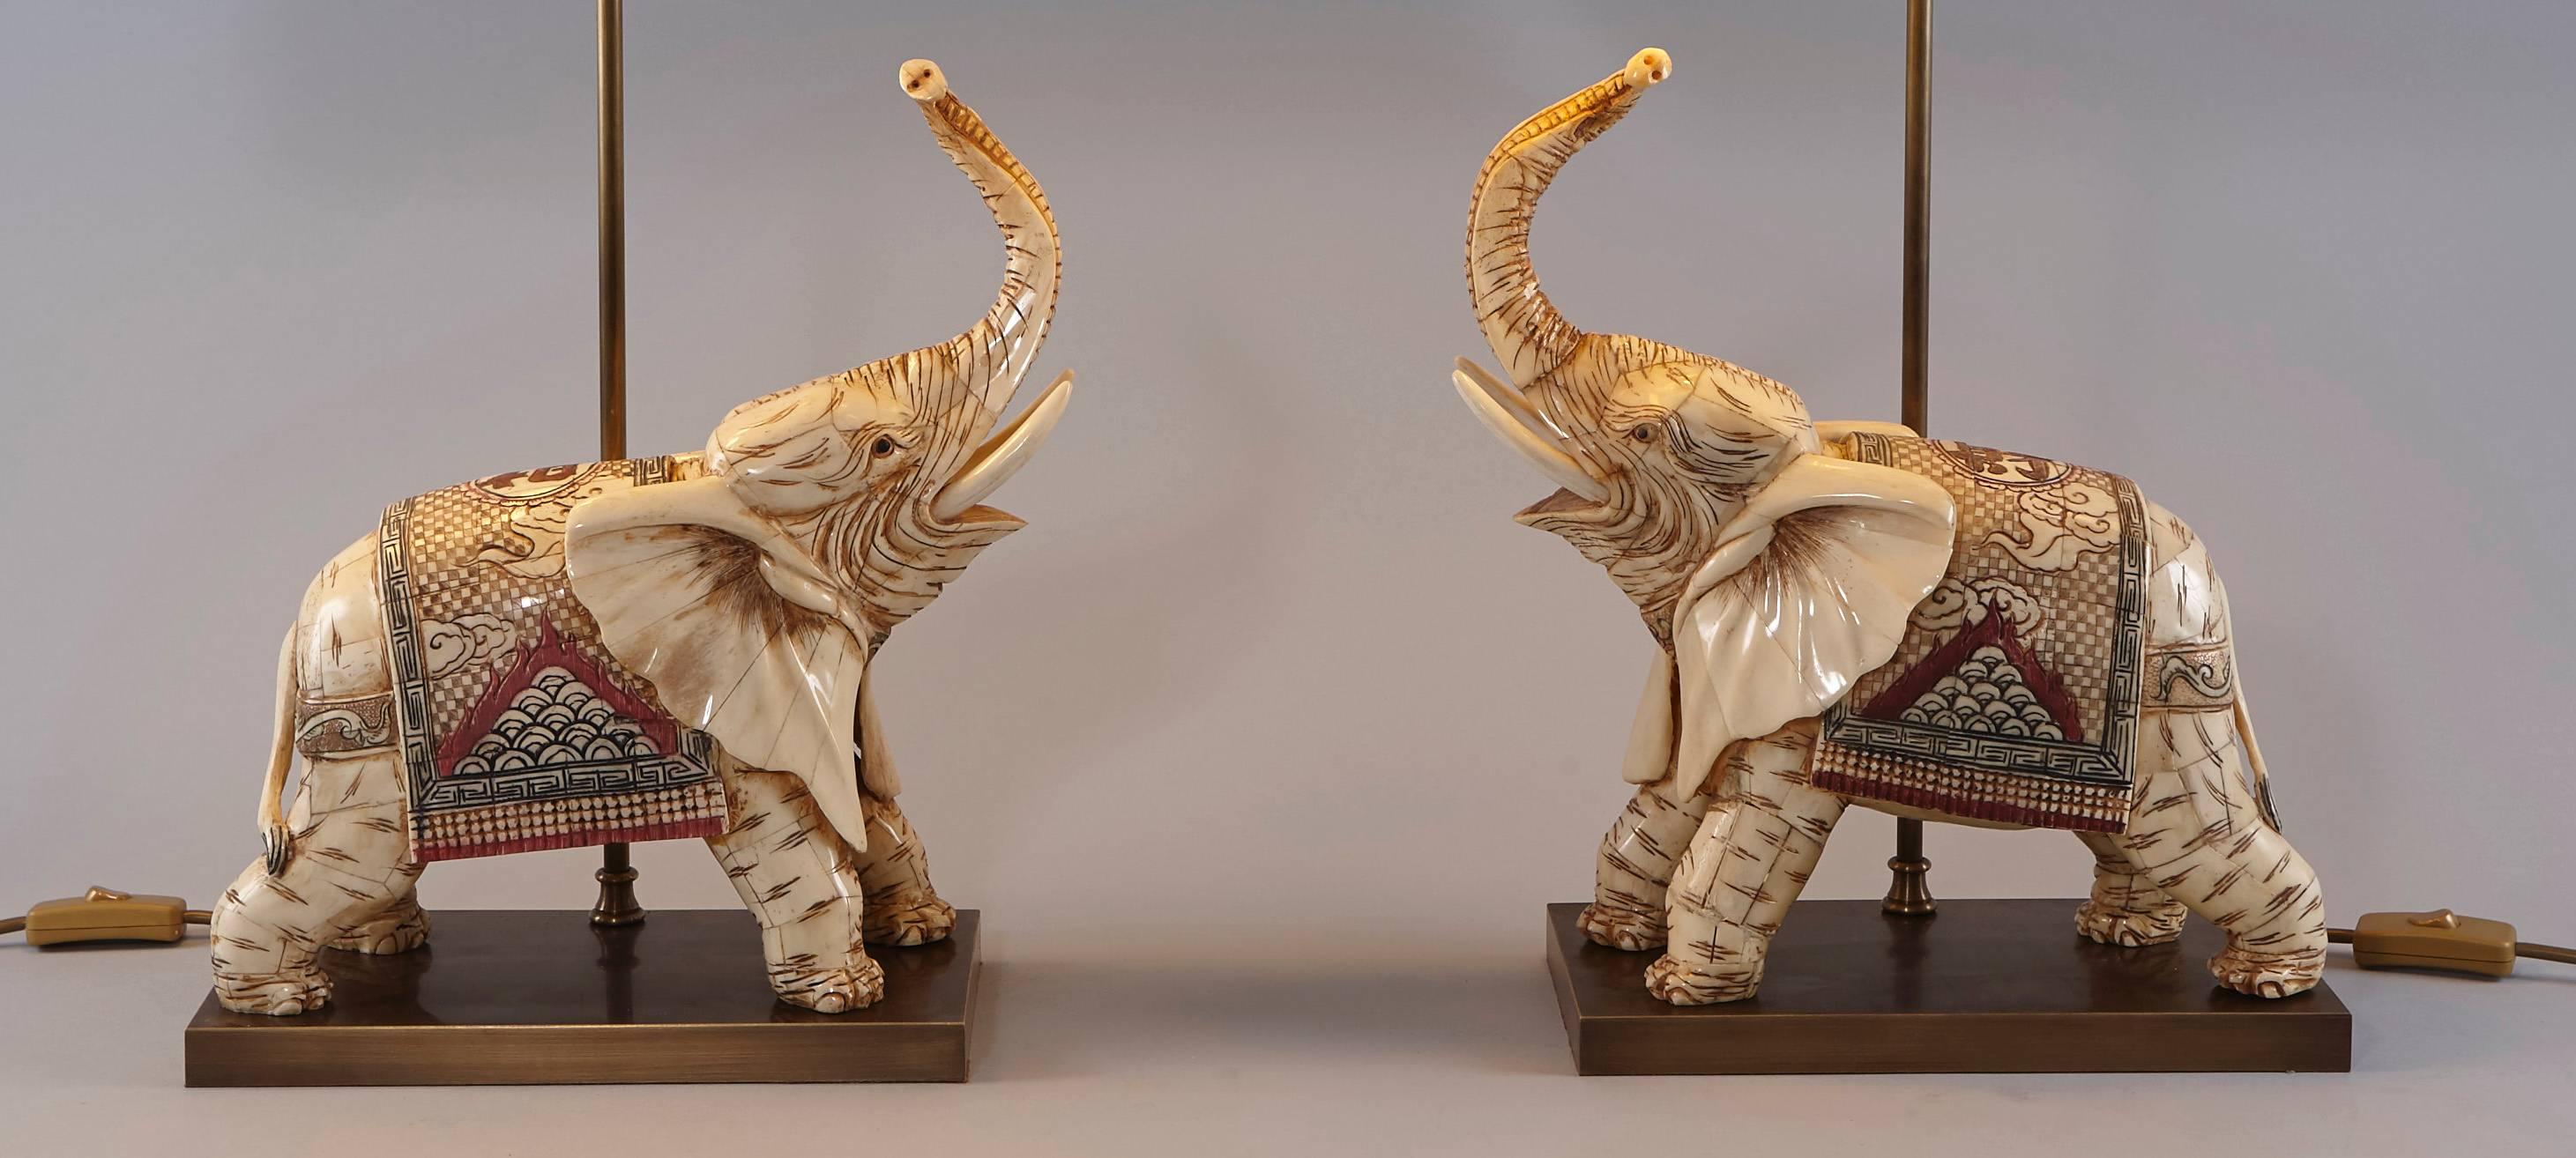 Pair of Bone Elephants as Table Lamps on a Brass Base .

